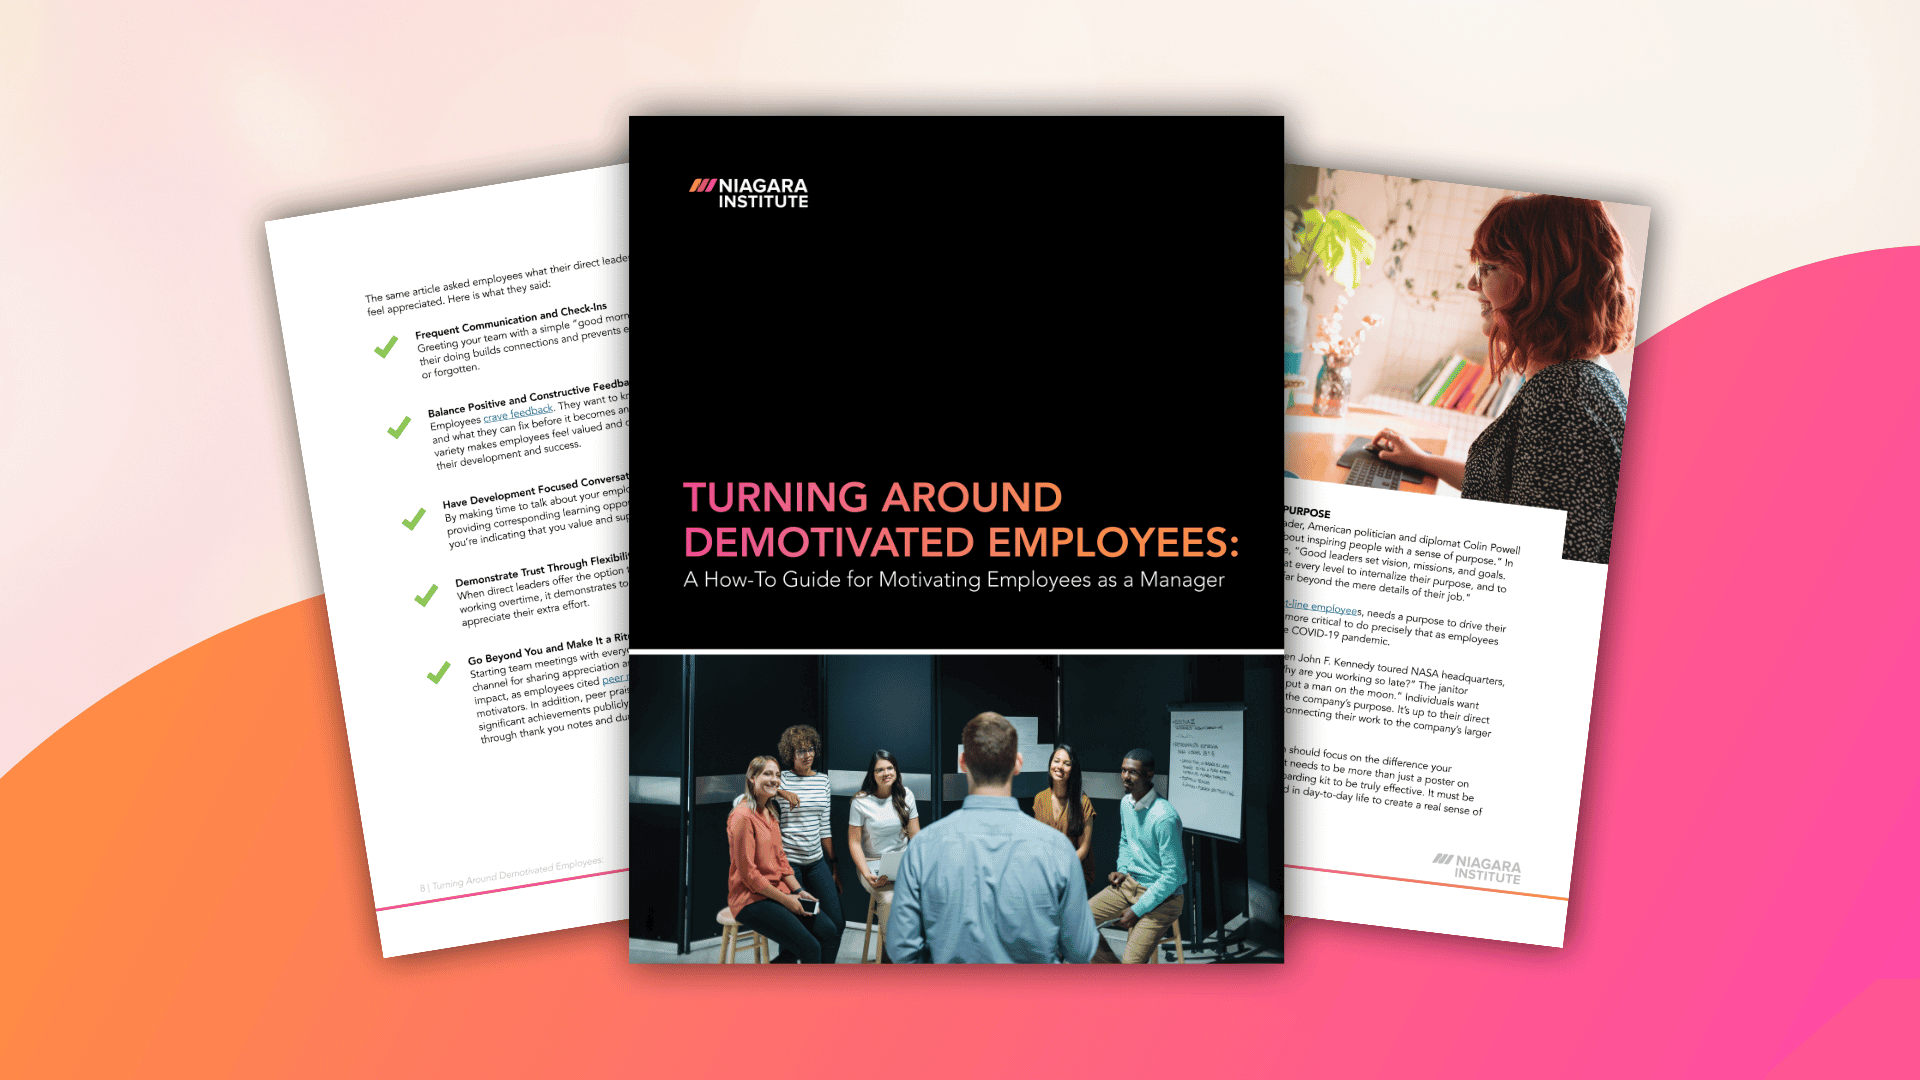 [GUIDE] Turning Around Demotivated Employees